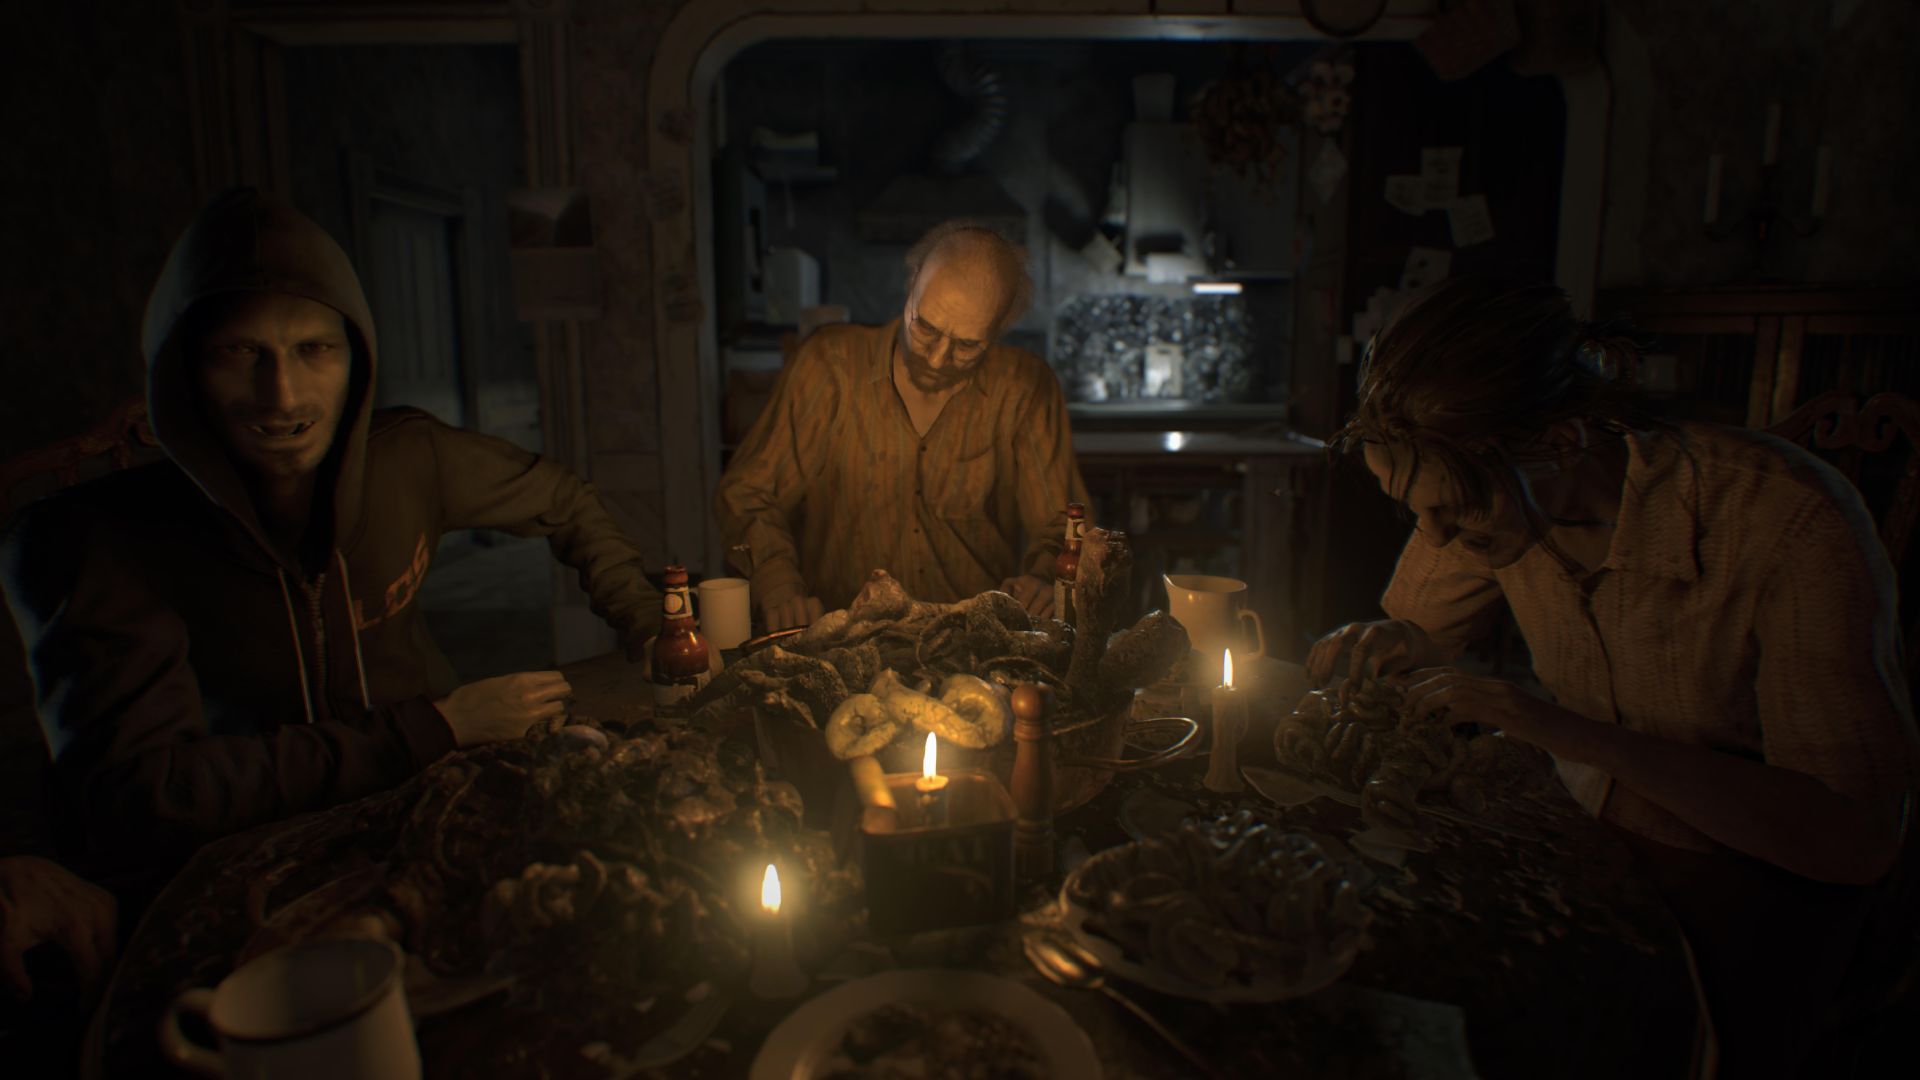 Resident Evil 7 screenshot of the family sitting around a candlelit table